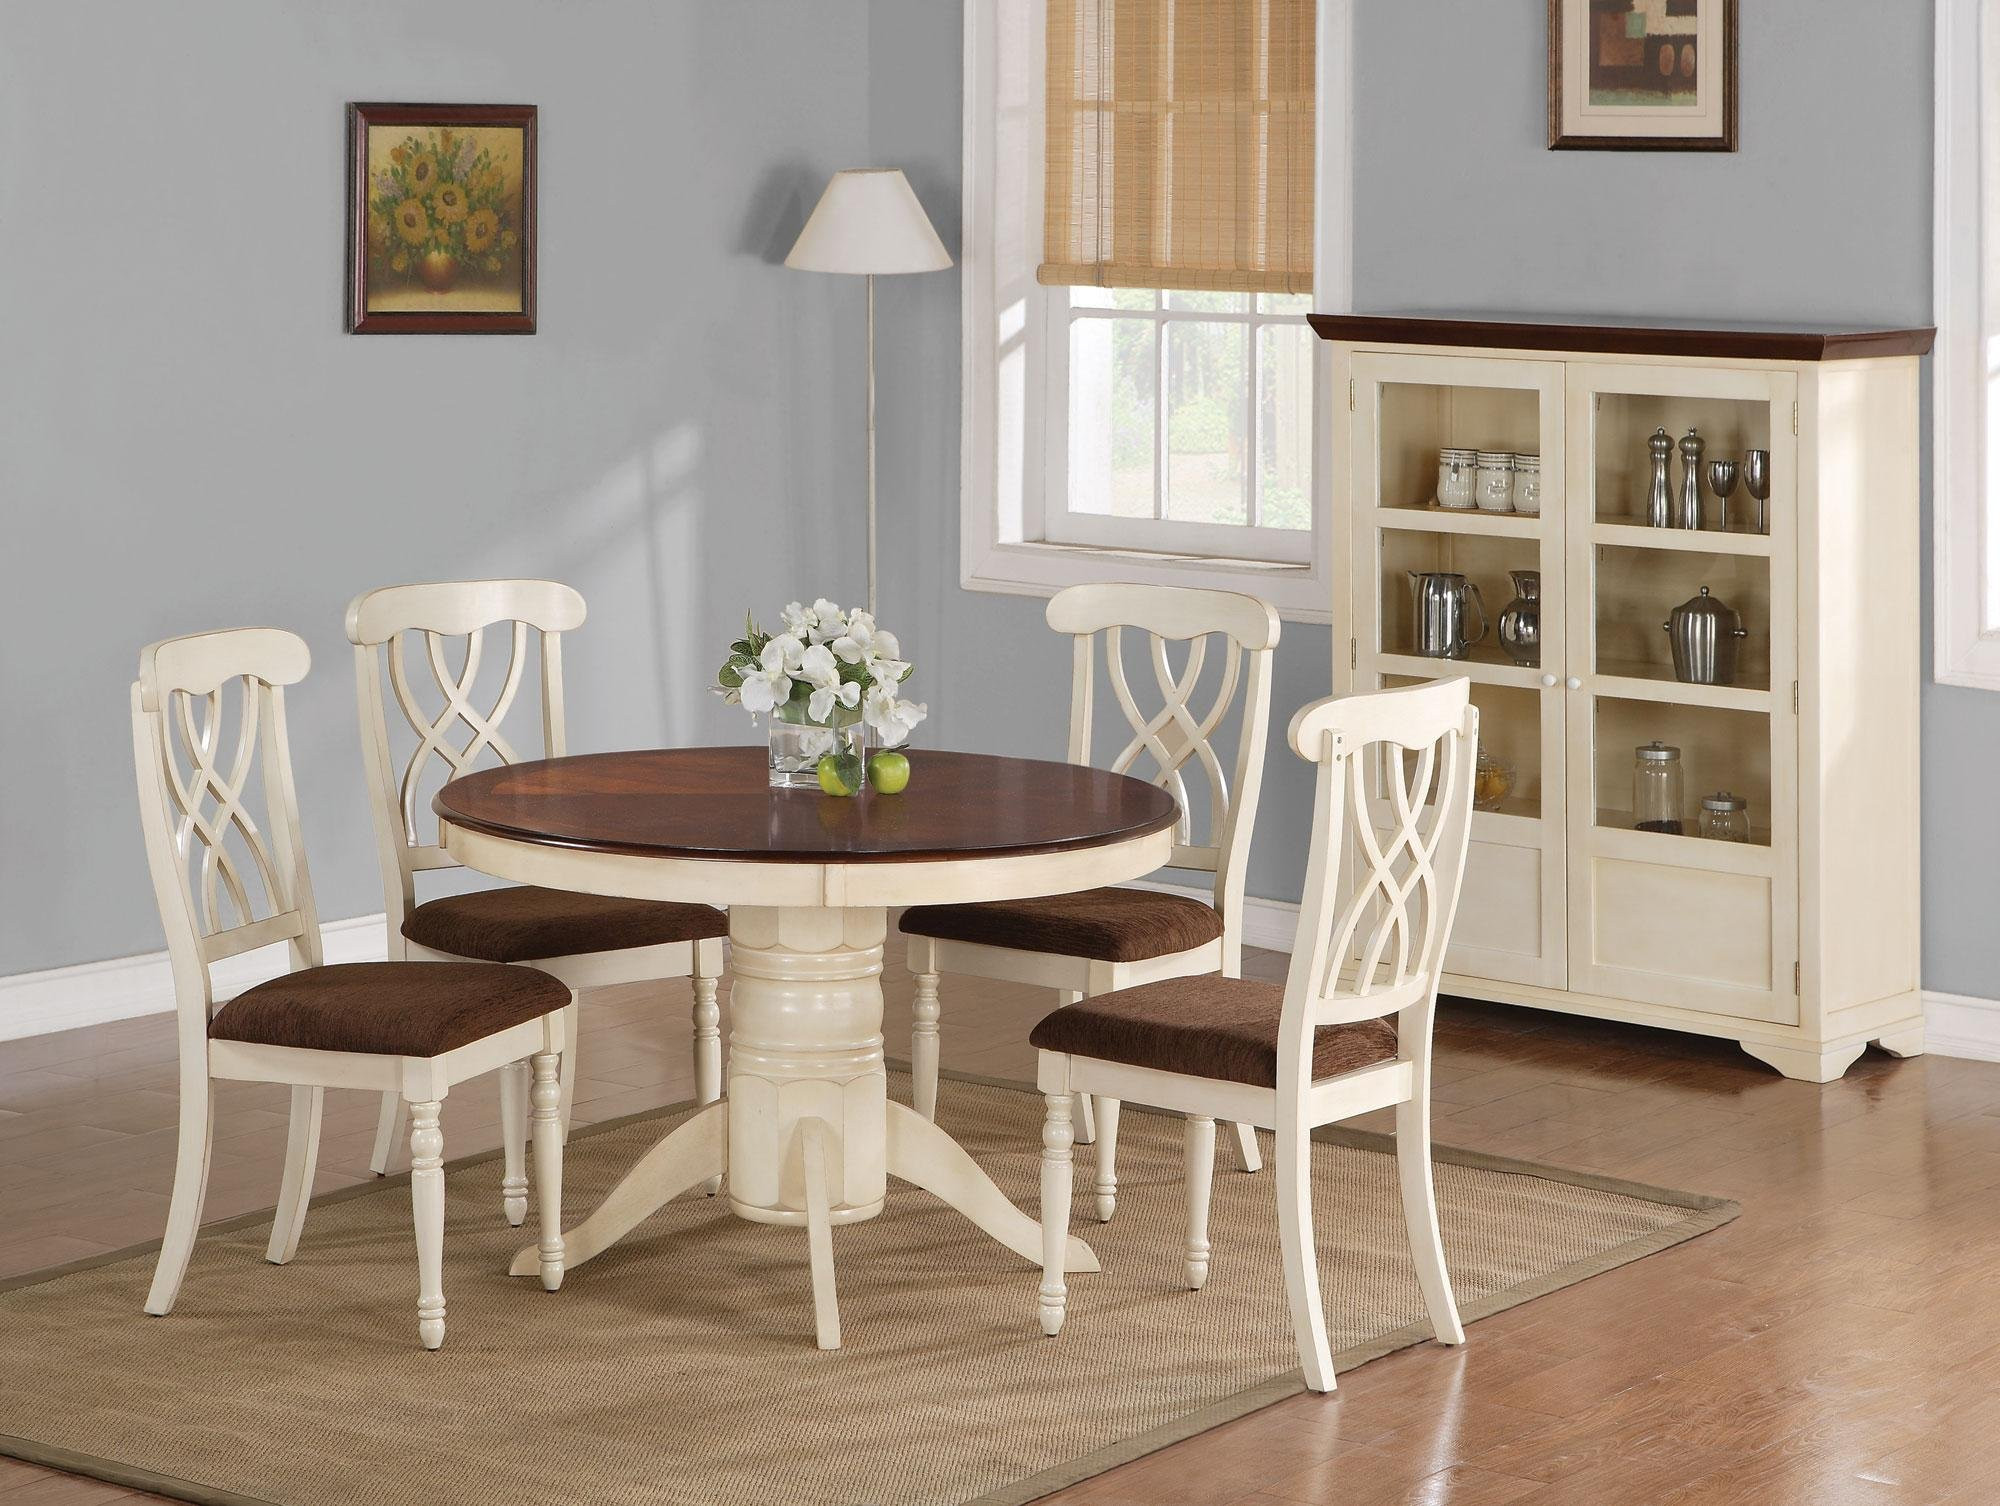 Small Round Kitchen Table Sets
 Beautiful White Round Kitchen Table and Chairs